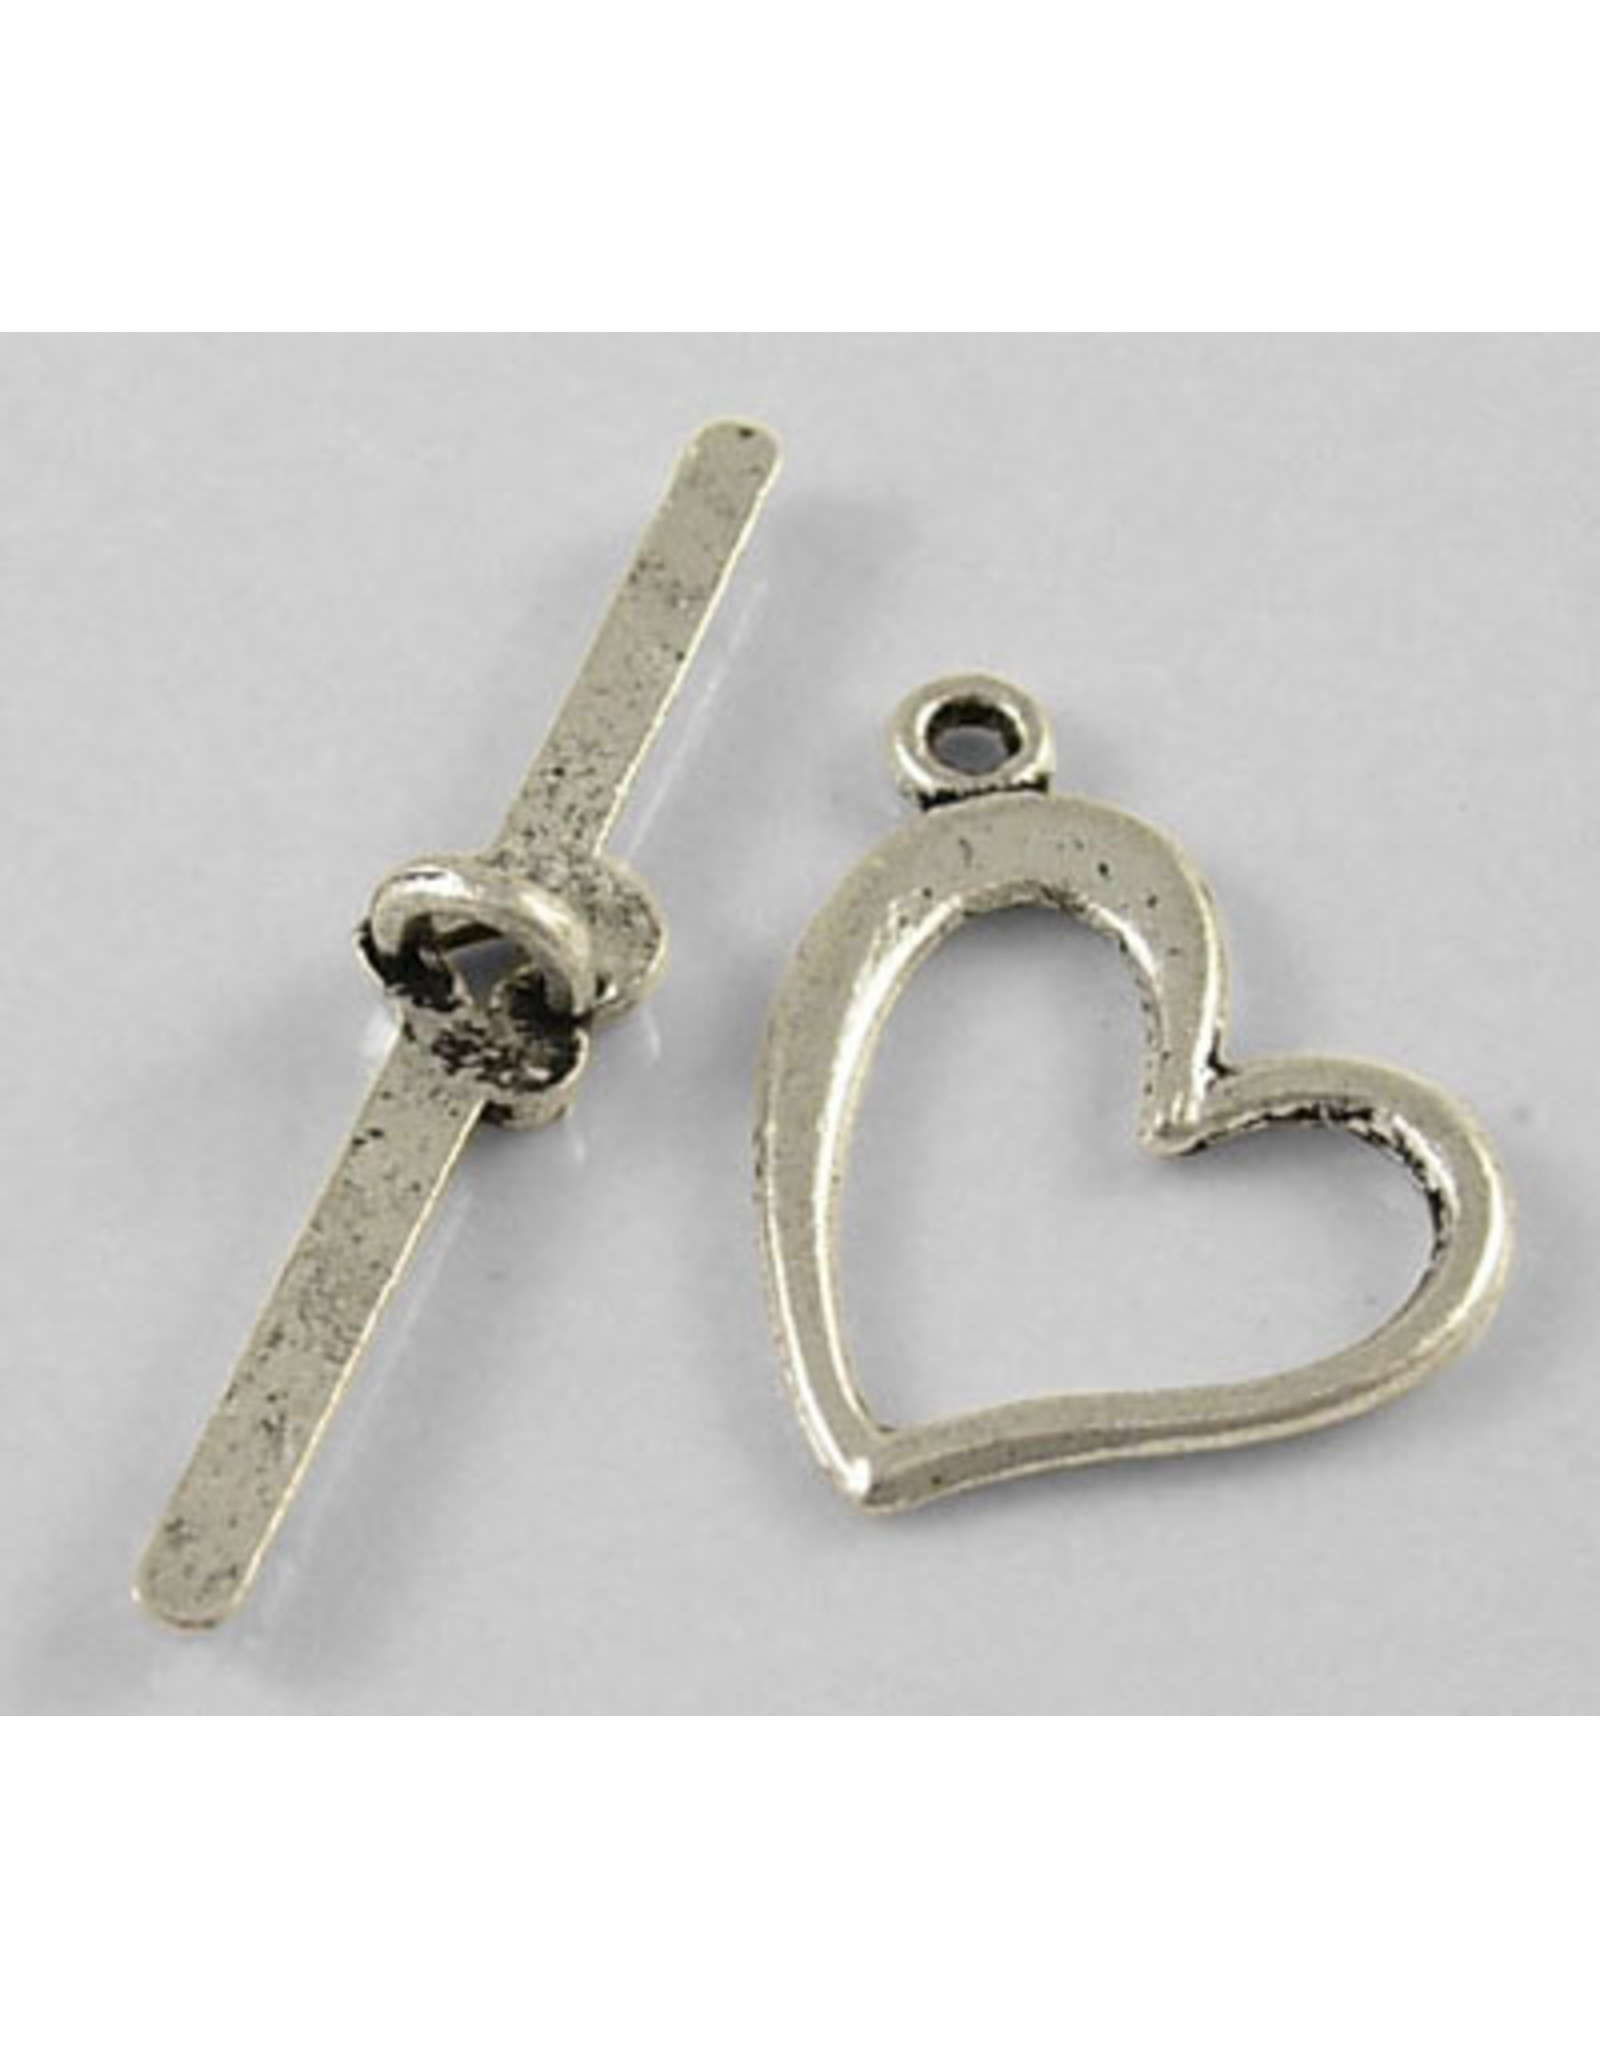 Toggle Clasp Heart 18mm Antique Silver  NF  x10